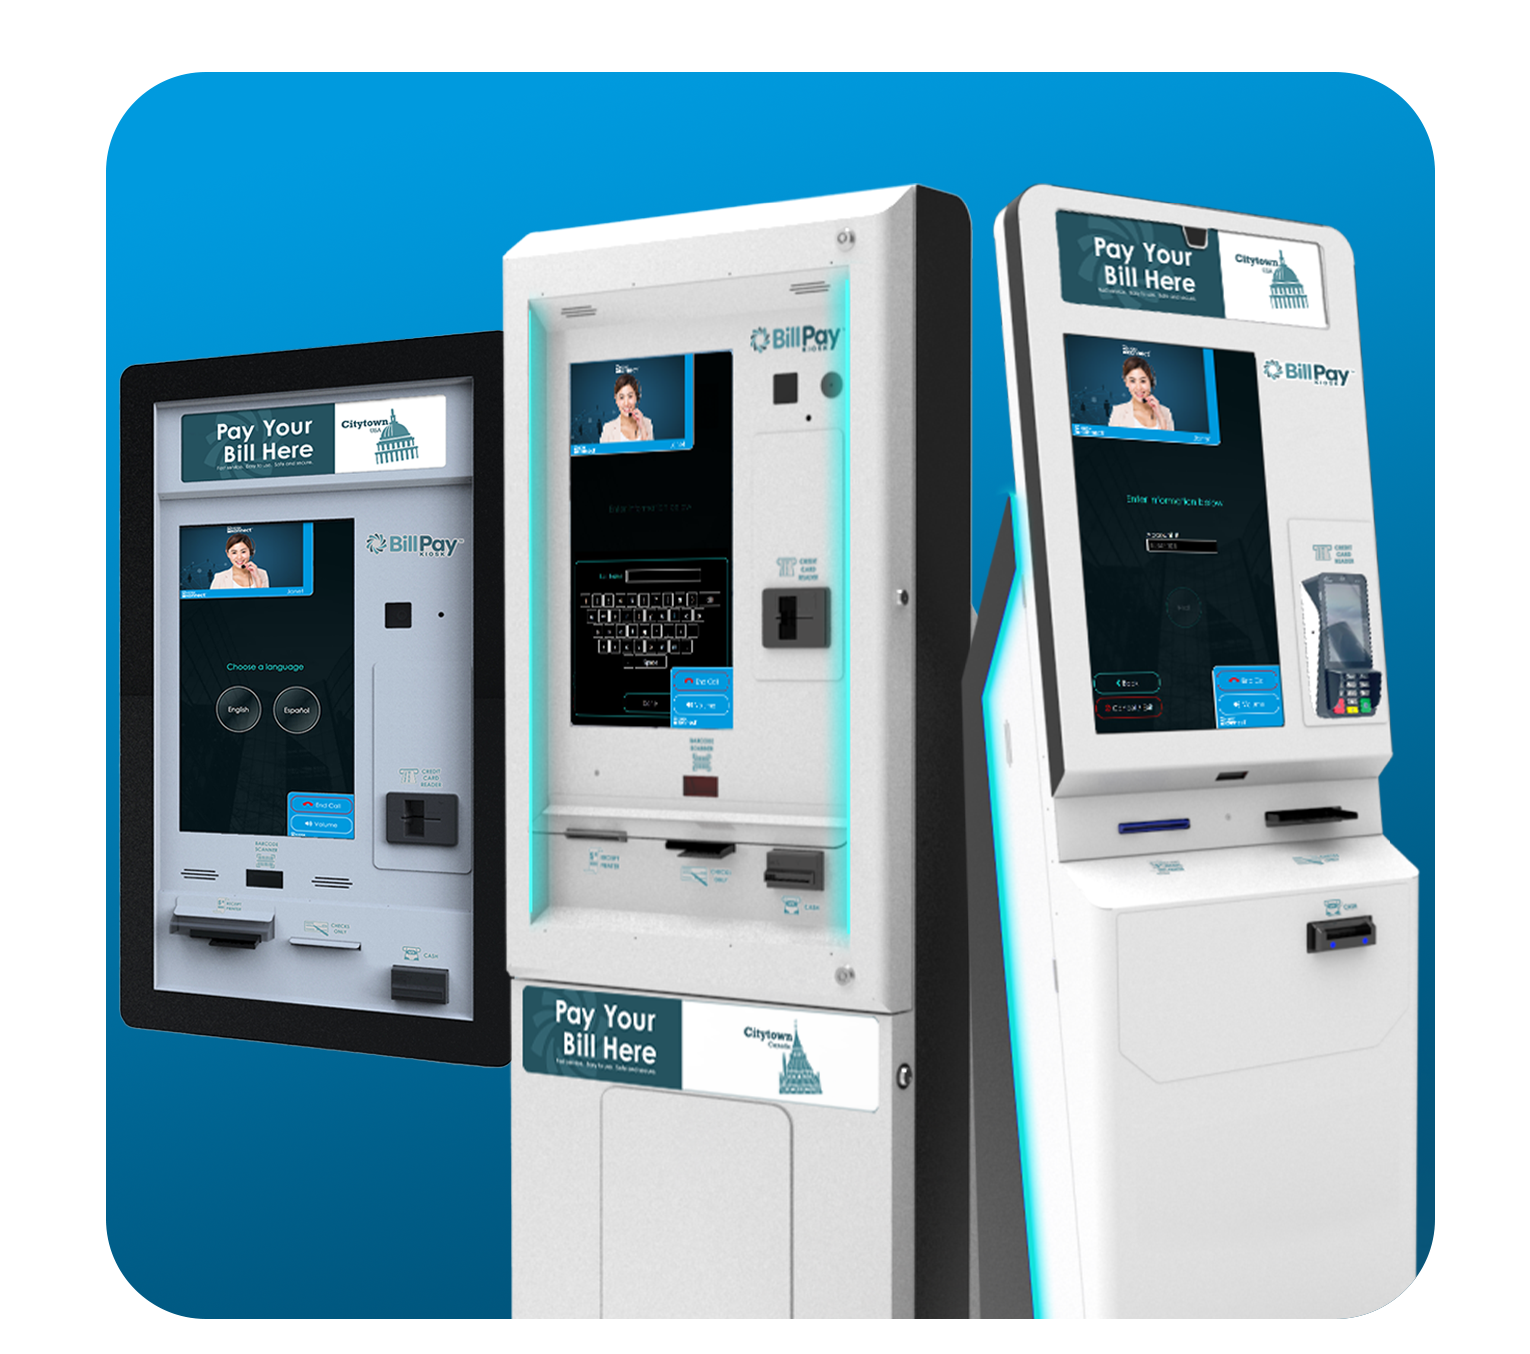 Three DynaTouch BillPay Kiosks in a row, with video conferencing on their screens.